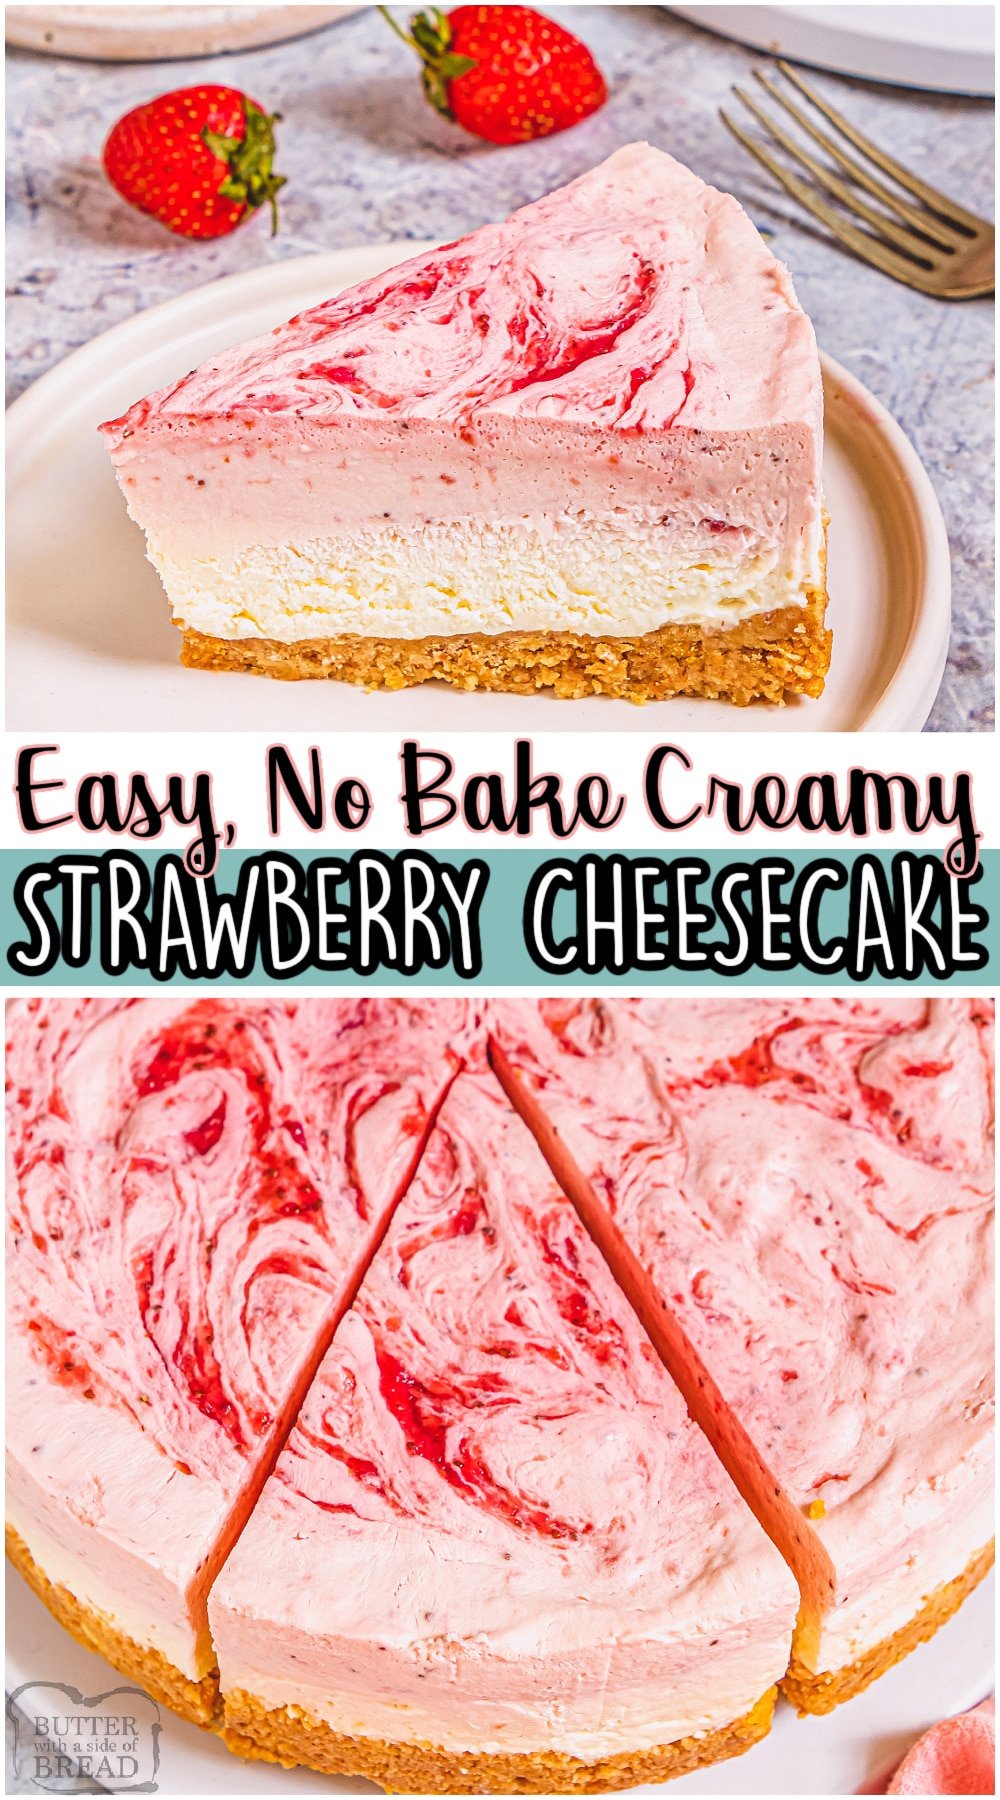 No Bake Strawberry Cheesecake made with a graham cracker crust, creamy cheesecake filling, & blended fresh strawberries! Double layer cheesecake with fantastic berry flavor perfect for summer! #cheesecake #nobake #strawberry #dessert #easyrecipe from BUTTER WITH A SIDE OF BREAD